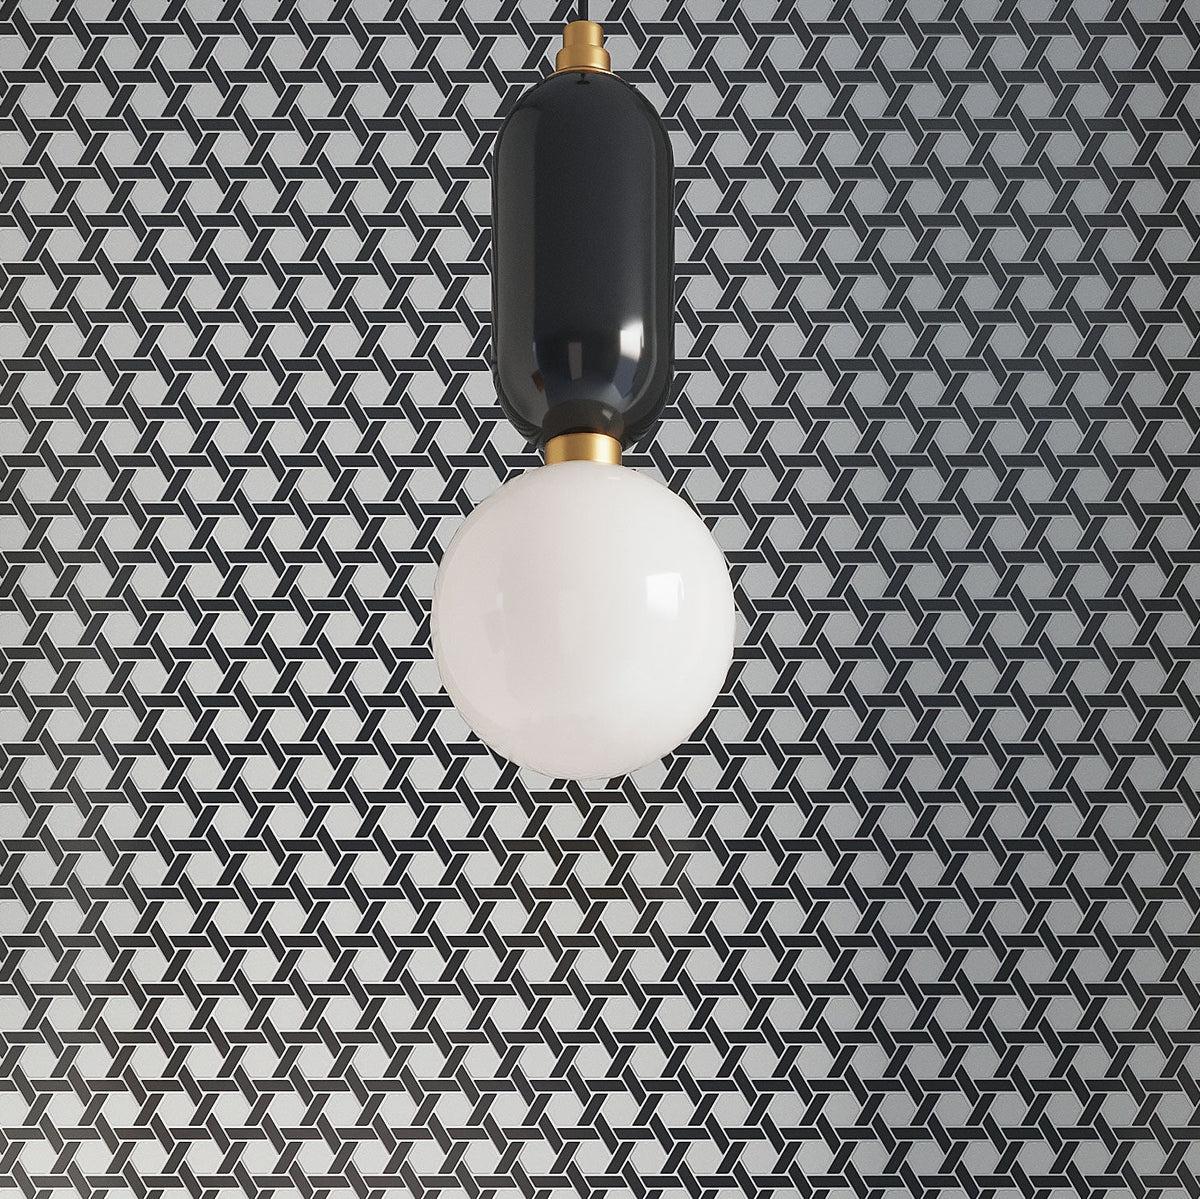 Lamp on Black And White Glass Mosaic Tile Wall